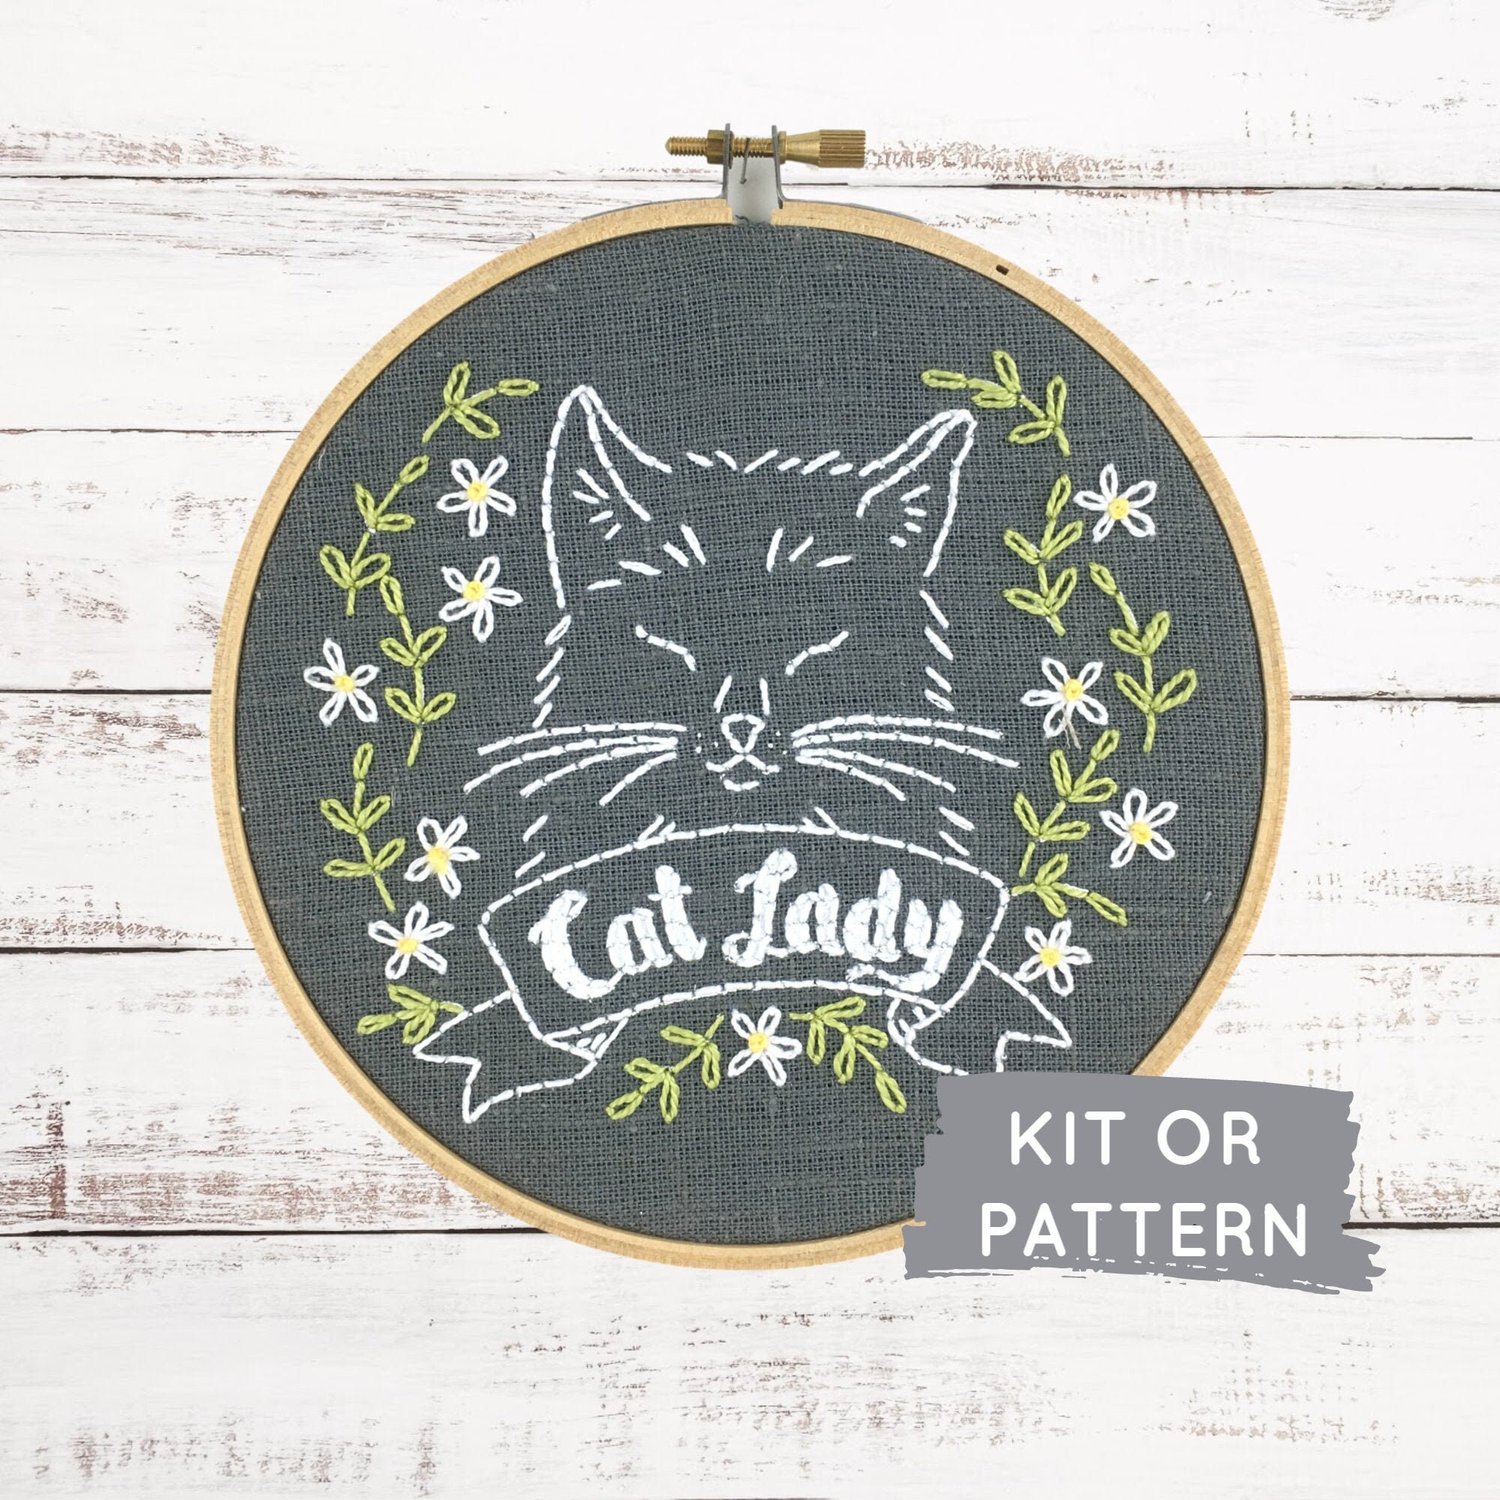 Cat Lady Embroidery Kit: Easy Modern Embroidery — I Heart Stitch Art:  Beginner Embroidery Kits + Patterns